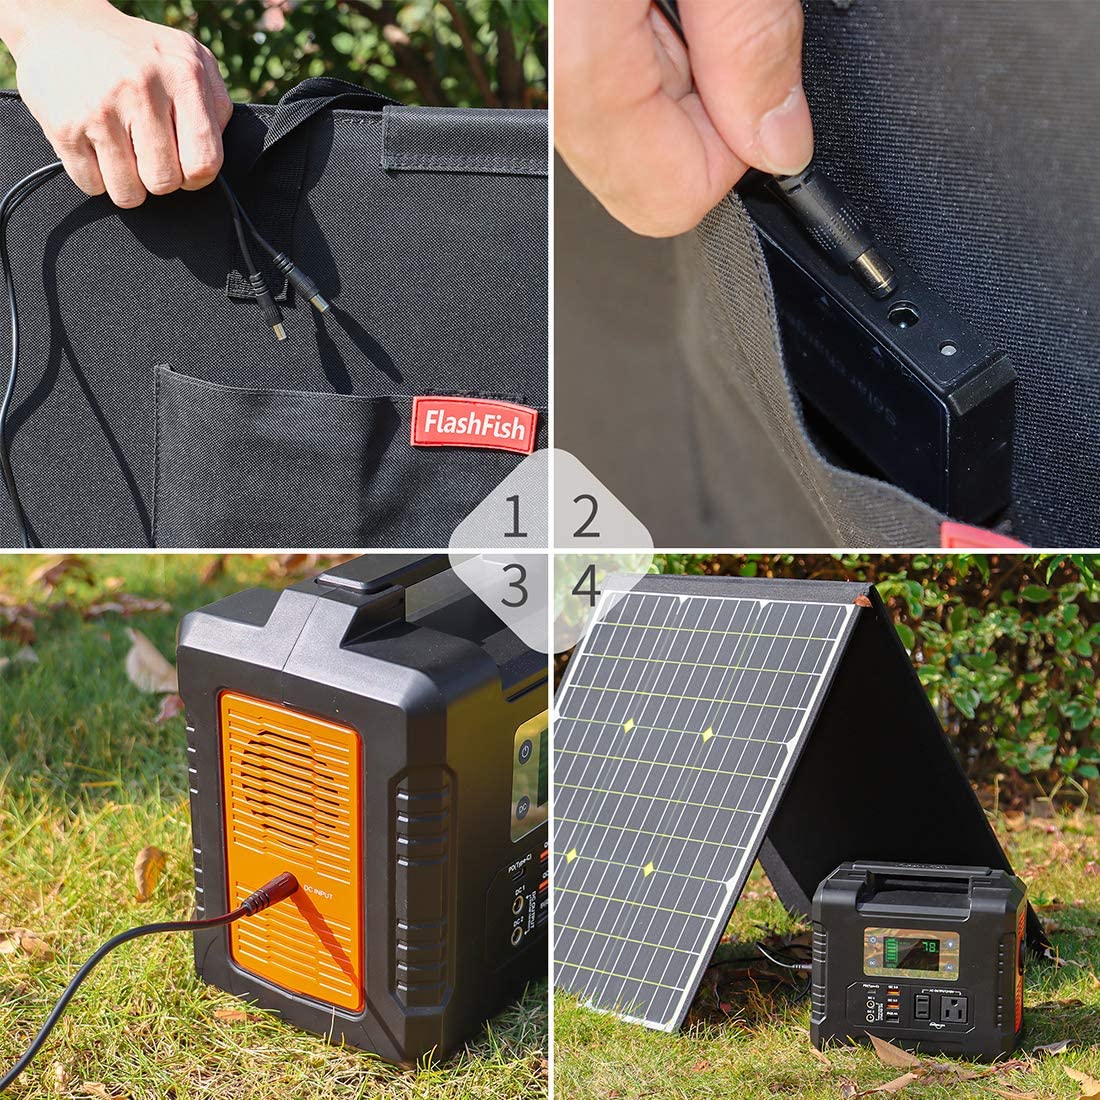 Flashfish 100W 18V Portable Foldable Solar Panel With 5V USB 18V DC Output Compatible With Portable Generators, Smartphones, Tablets And More New